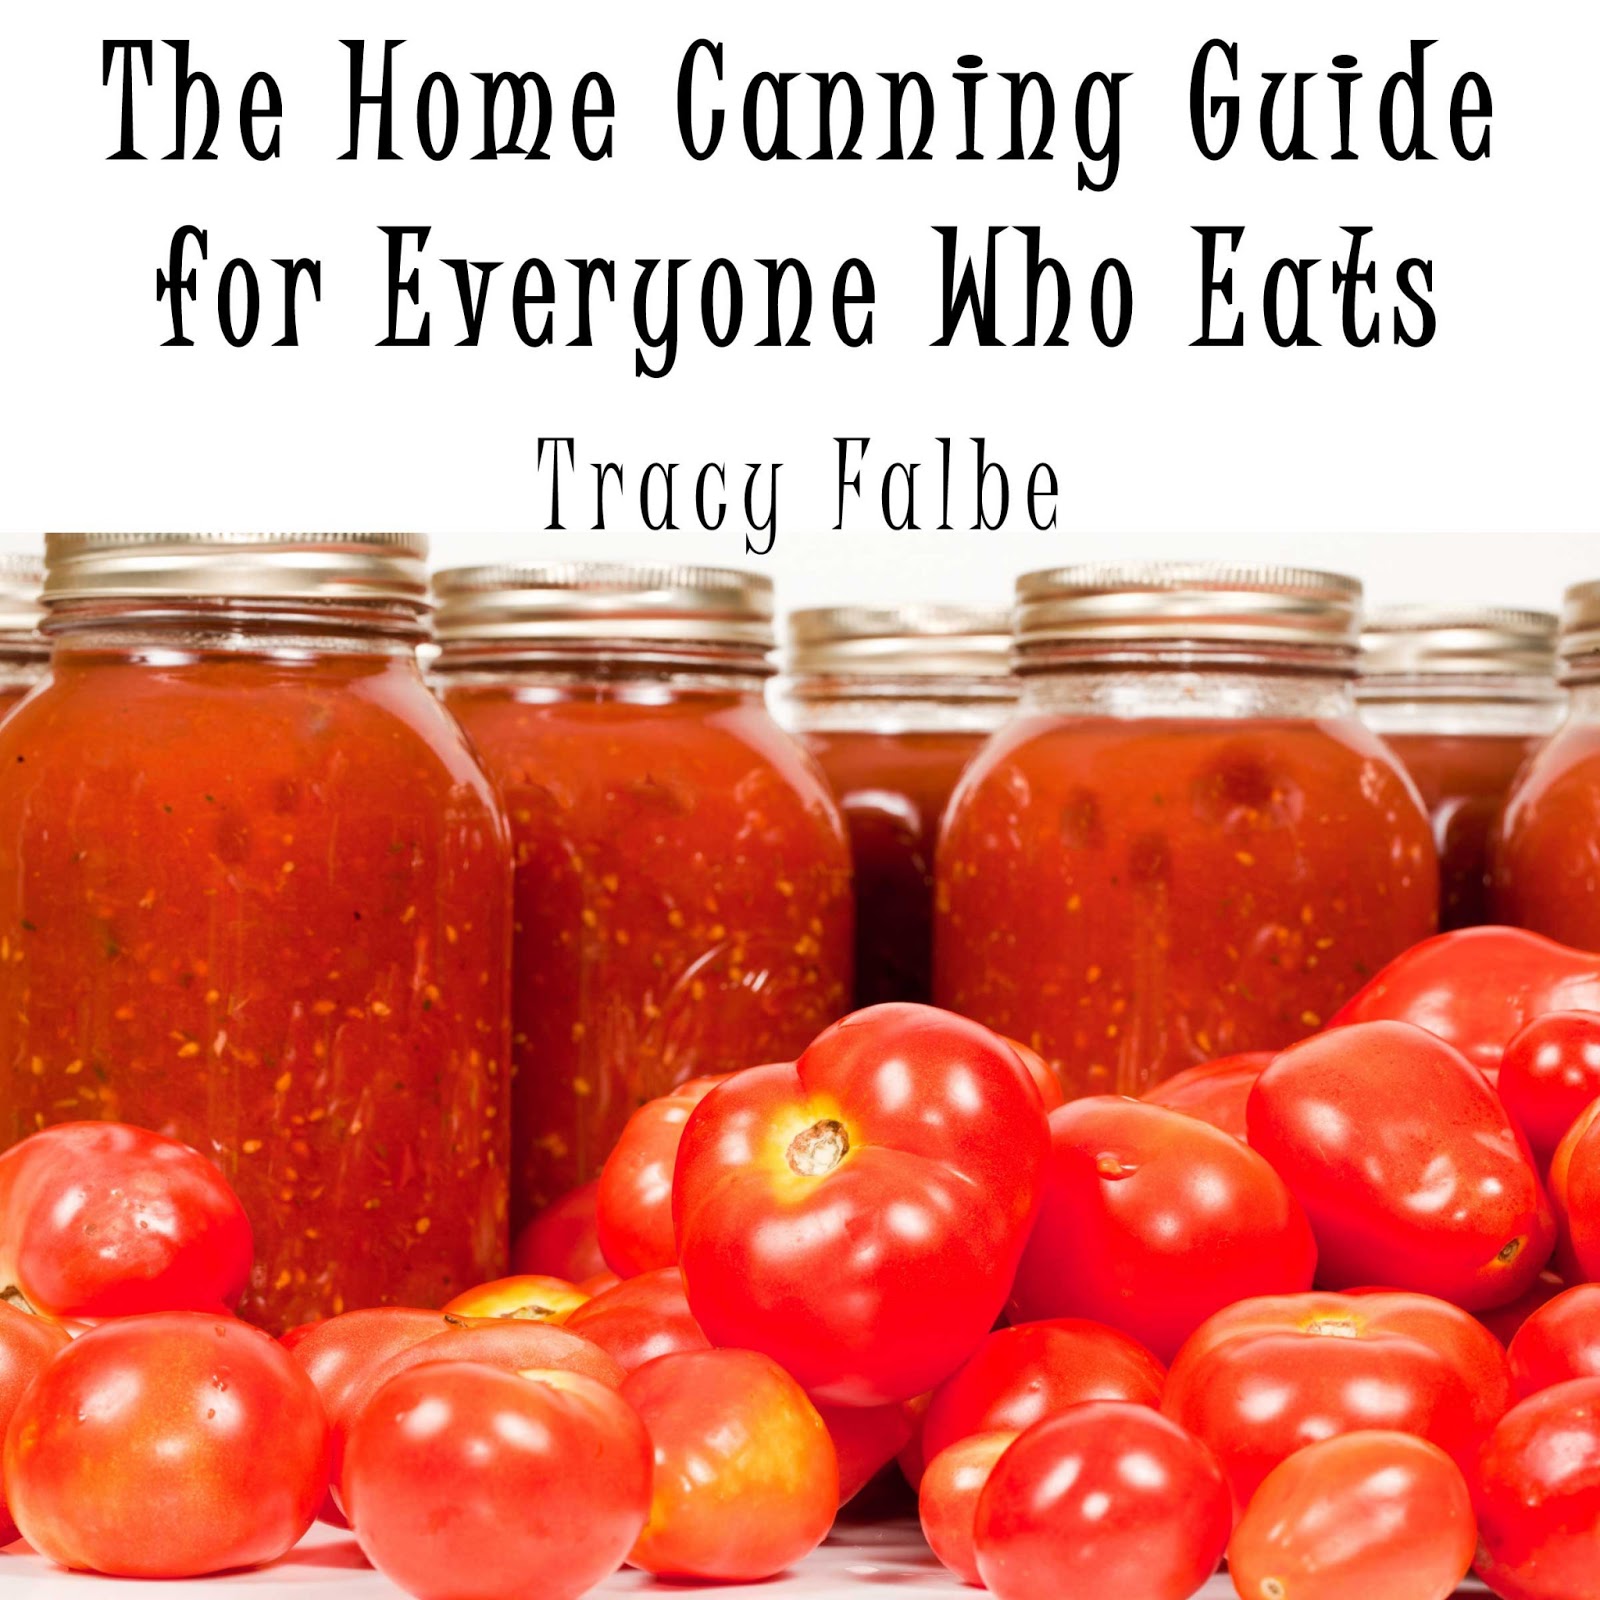 The Home Canning Guide for Everyone Who Eats Tracy Falbe